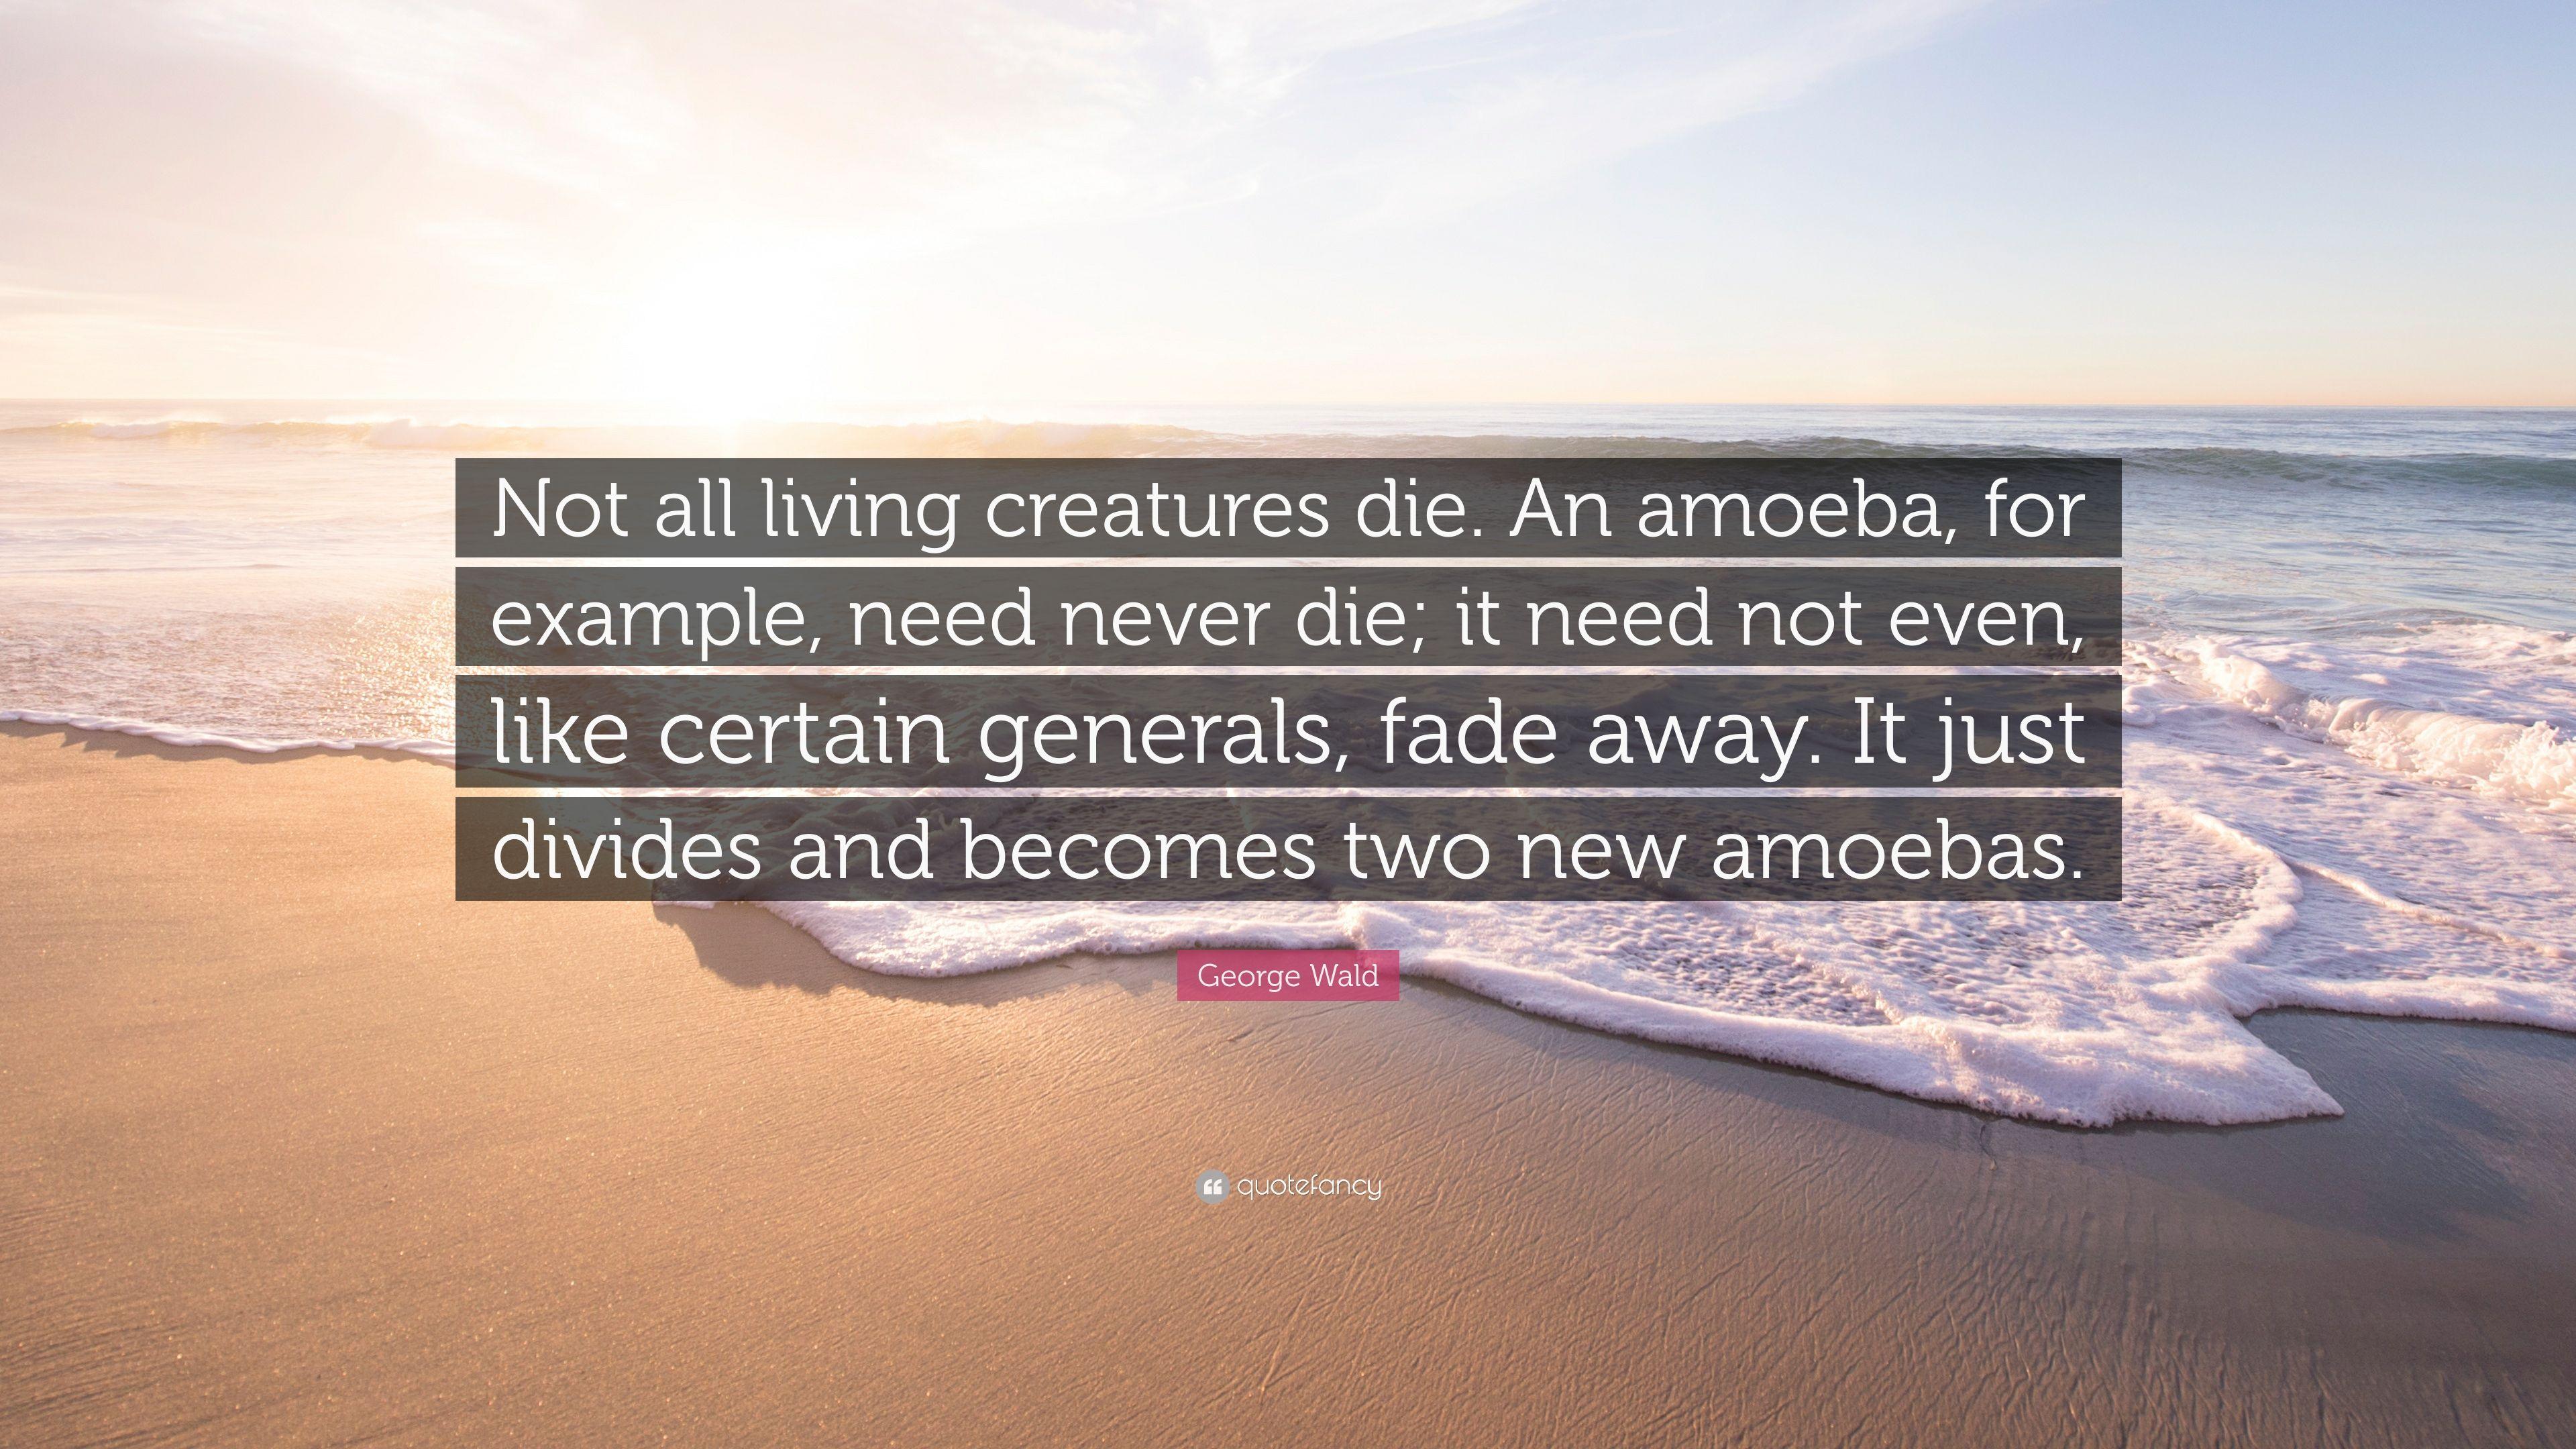 George Wald Quote: “Not all living creatures die. An amoeba